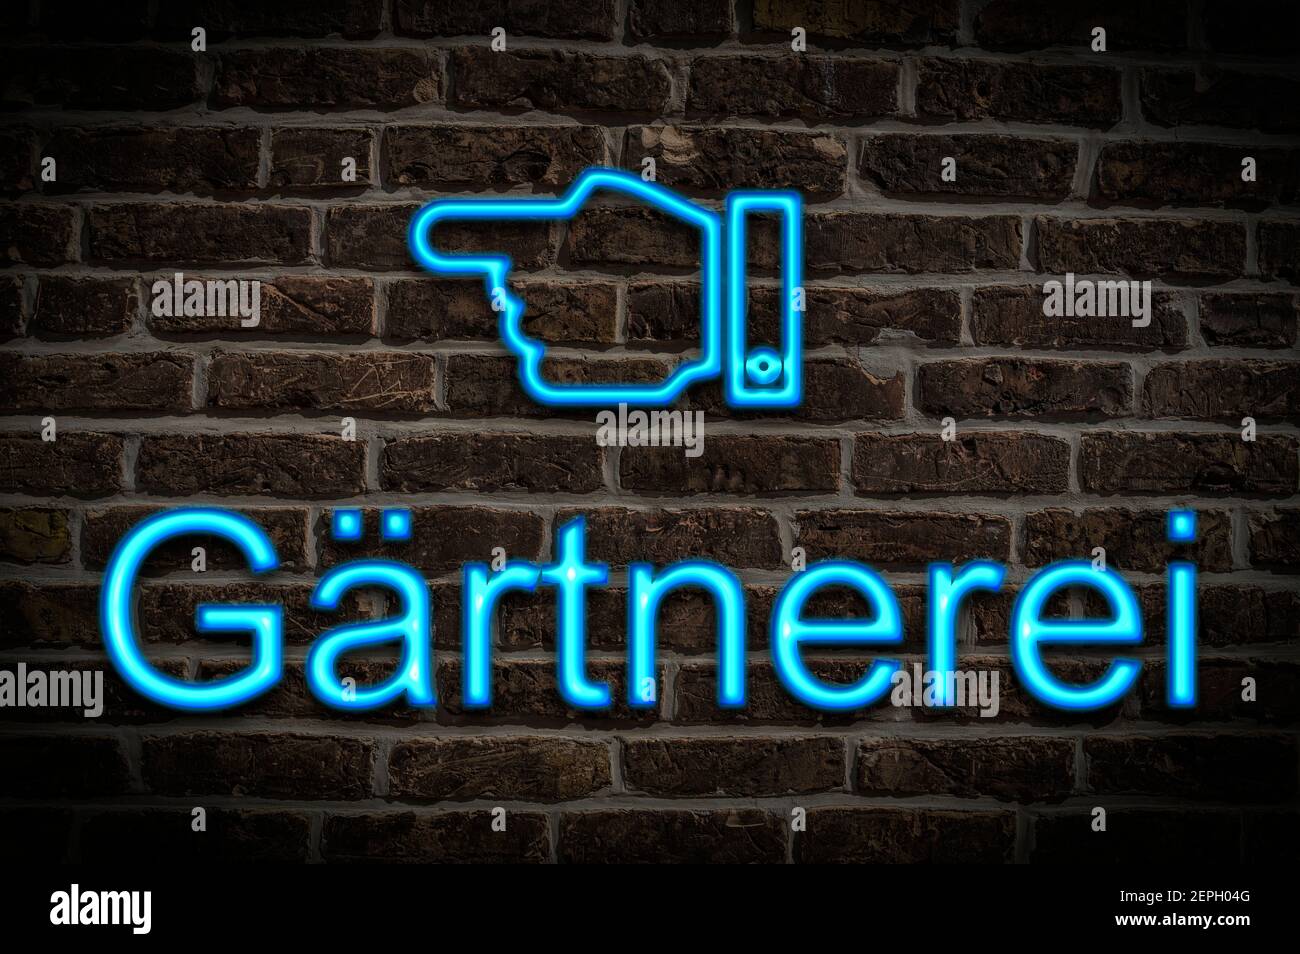 Detail photo of a a neon sign on a wall with the inscription Gärtnerei (Nursery) Stock Photo